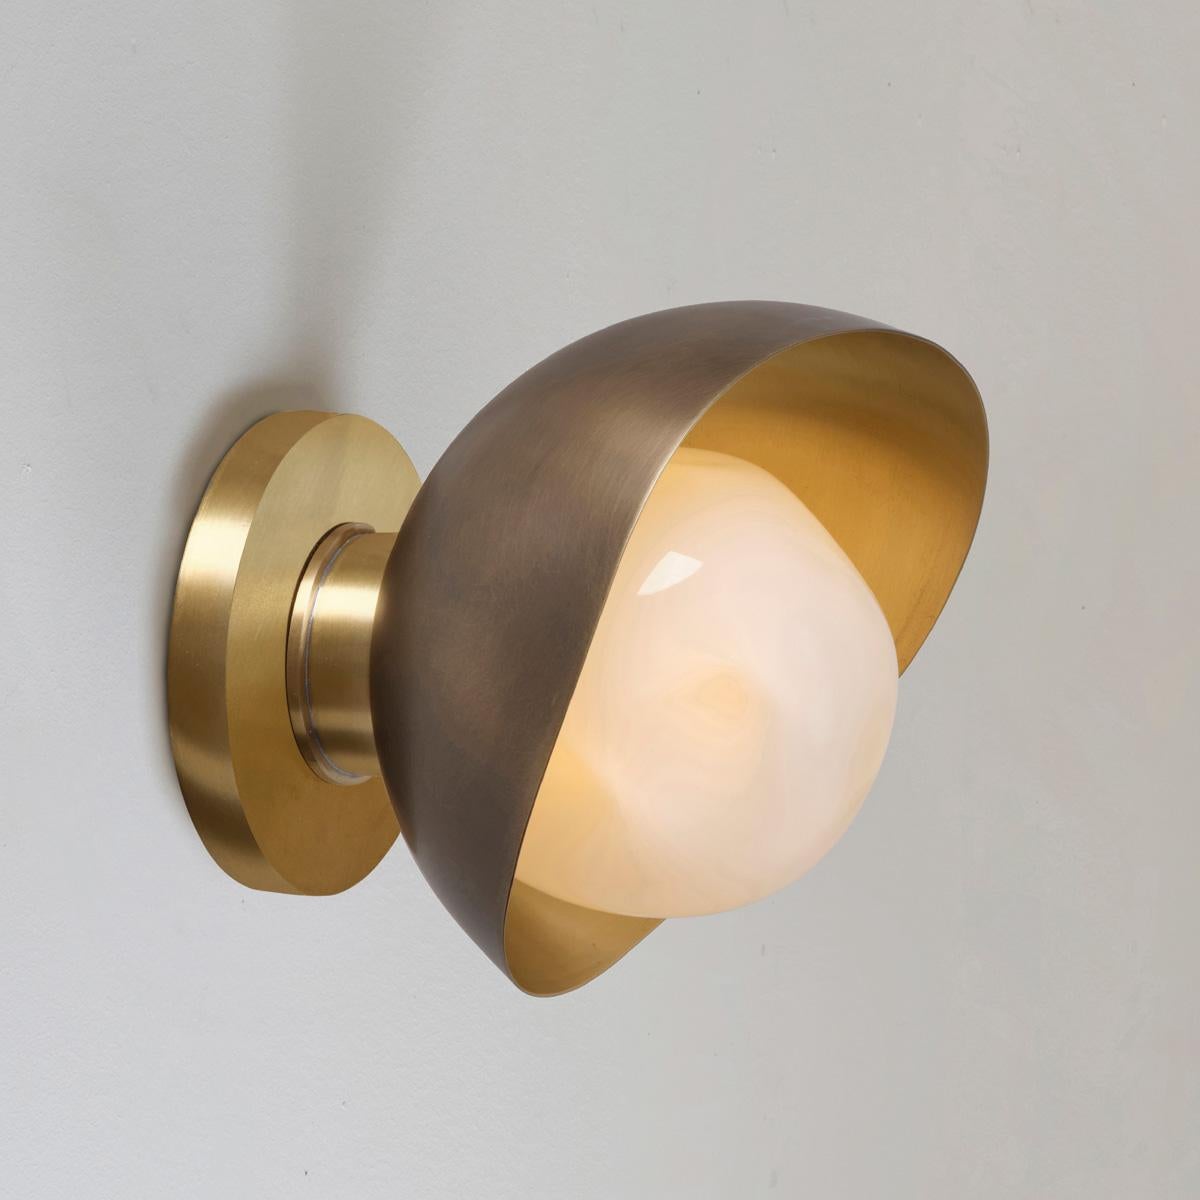 Perla Mini Wall Light by Gaspare Asaro. Powder Pink and Satin Brass Finish For Sale 1